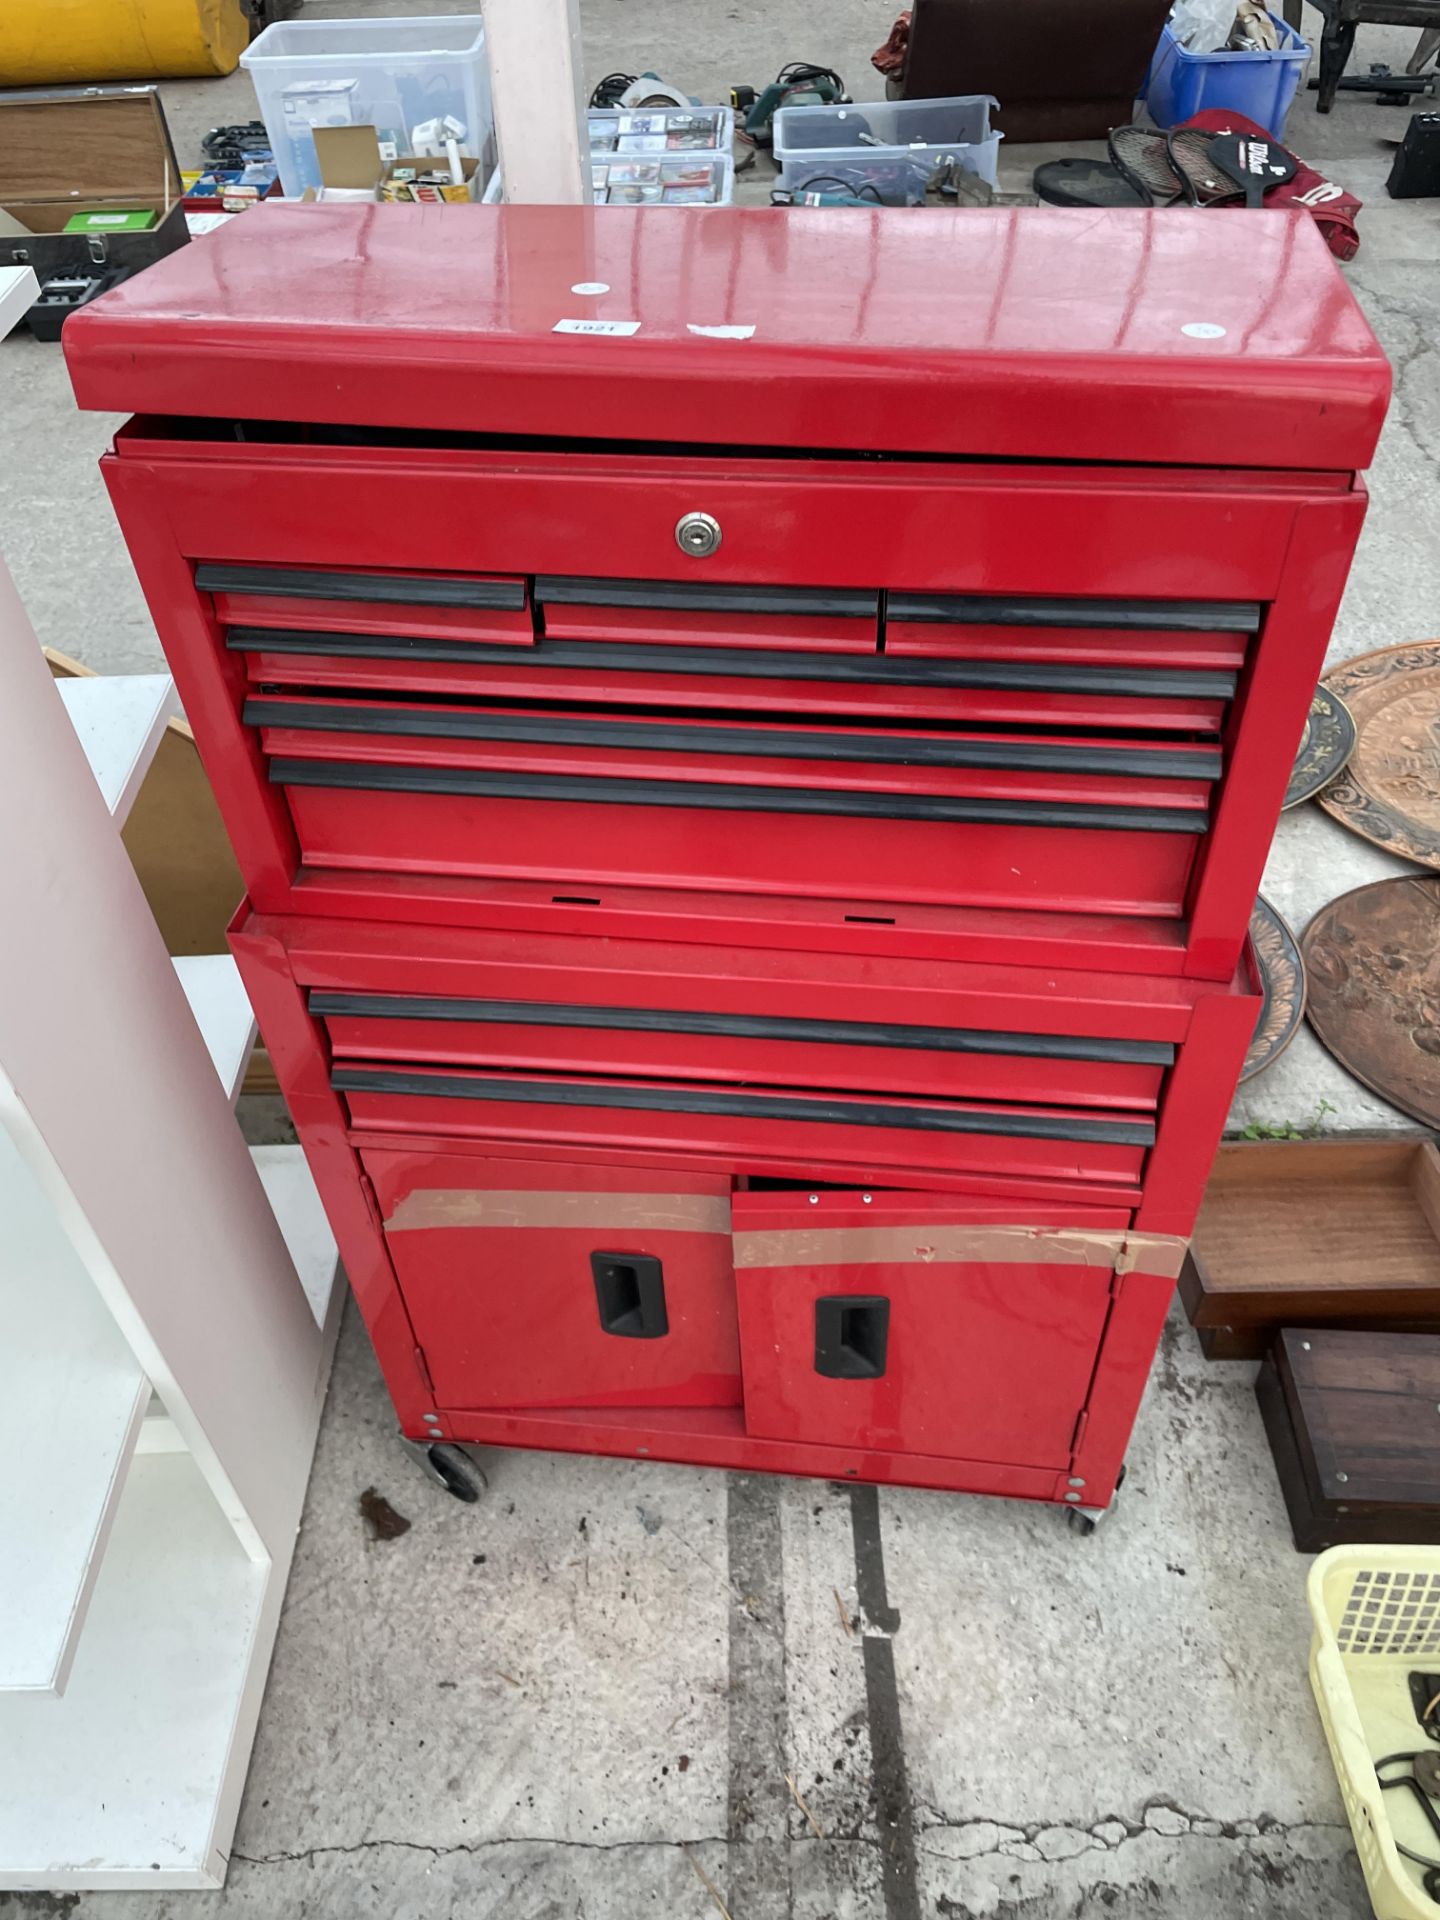 A FOUR WHEELED METAL WORKSHOP TOOL CHEST WITH MULTIPLE DRAWERS AND LOWER CUPBOARD